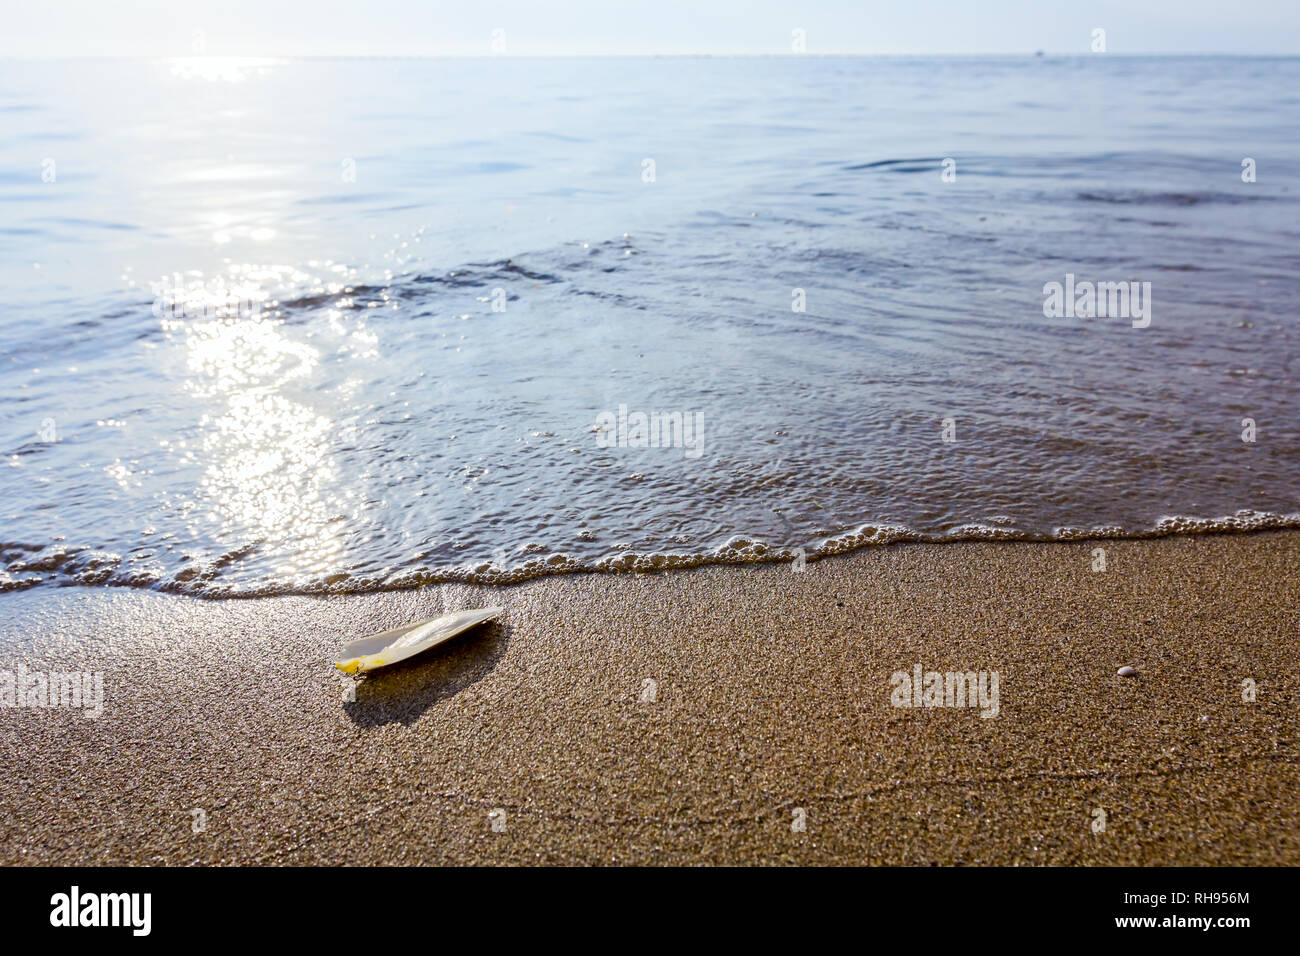 Cuttlebone is washed up by the sea on sandy beach. Stock Photo